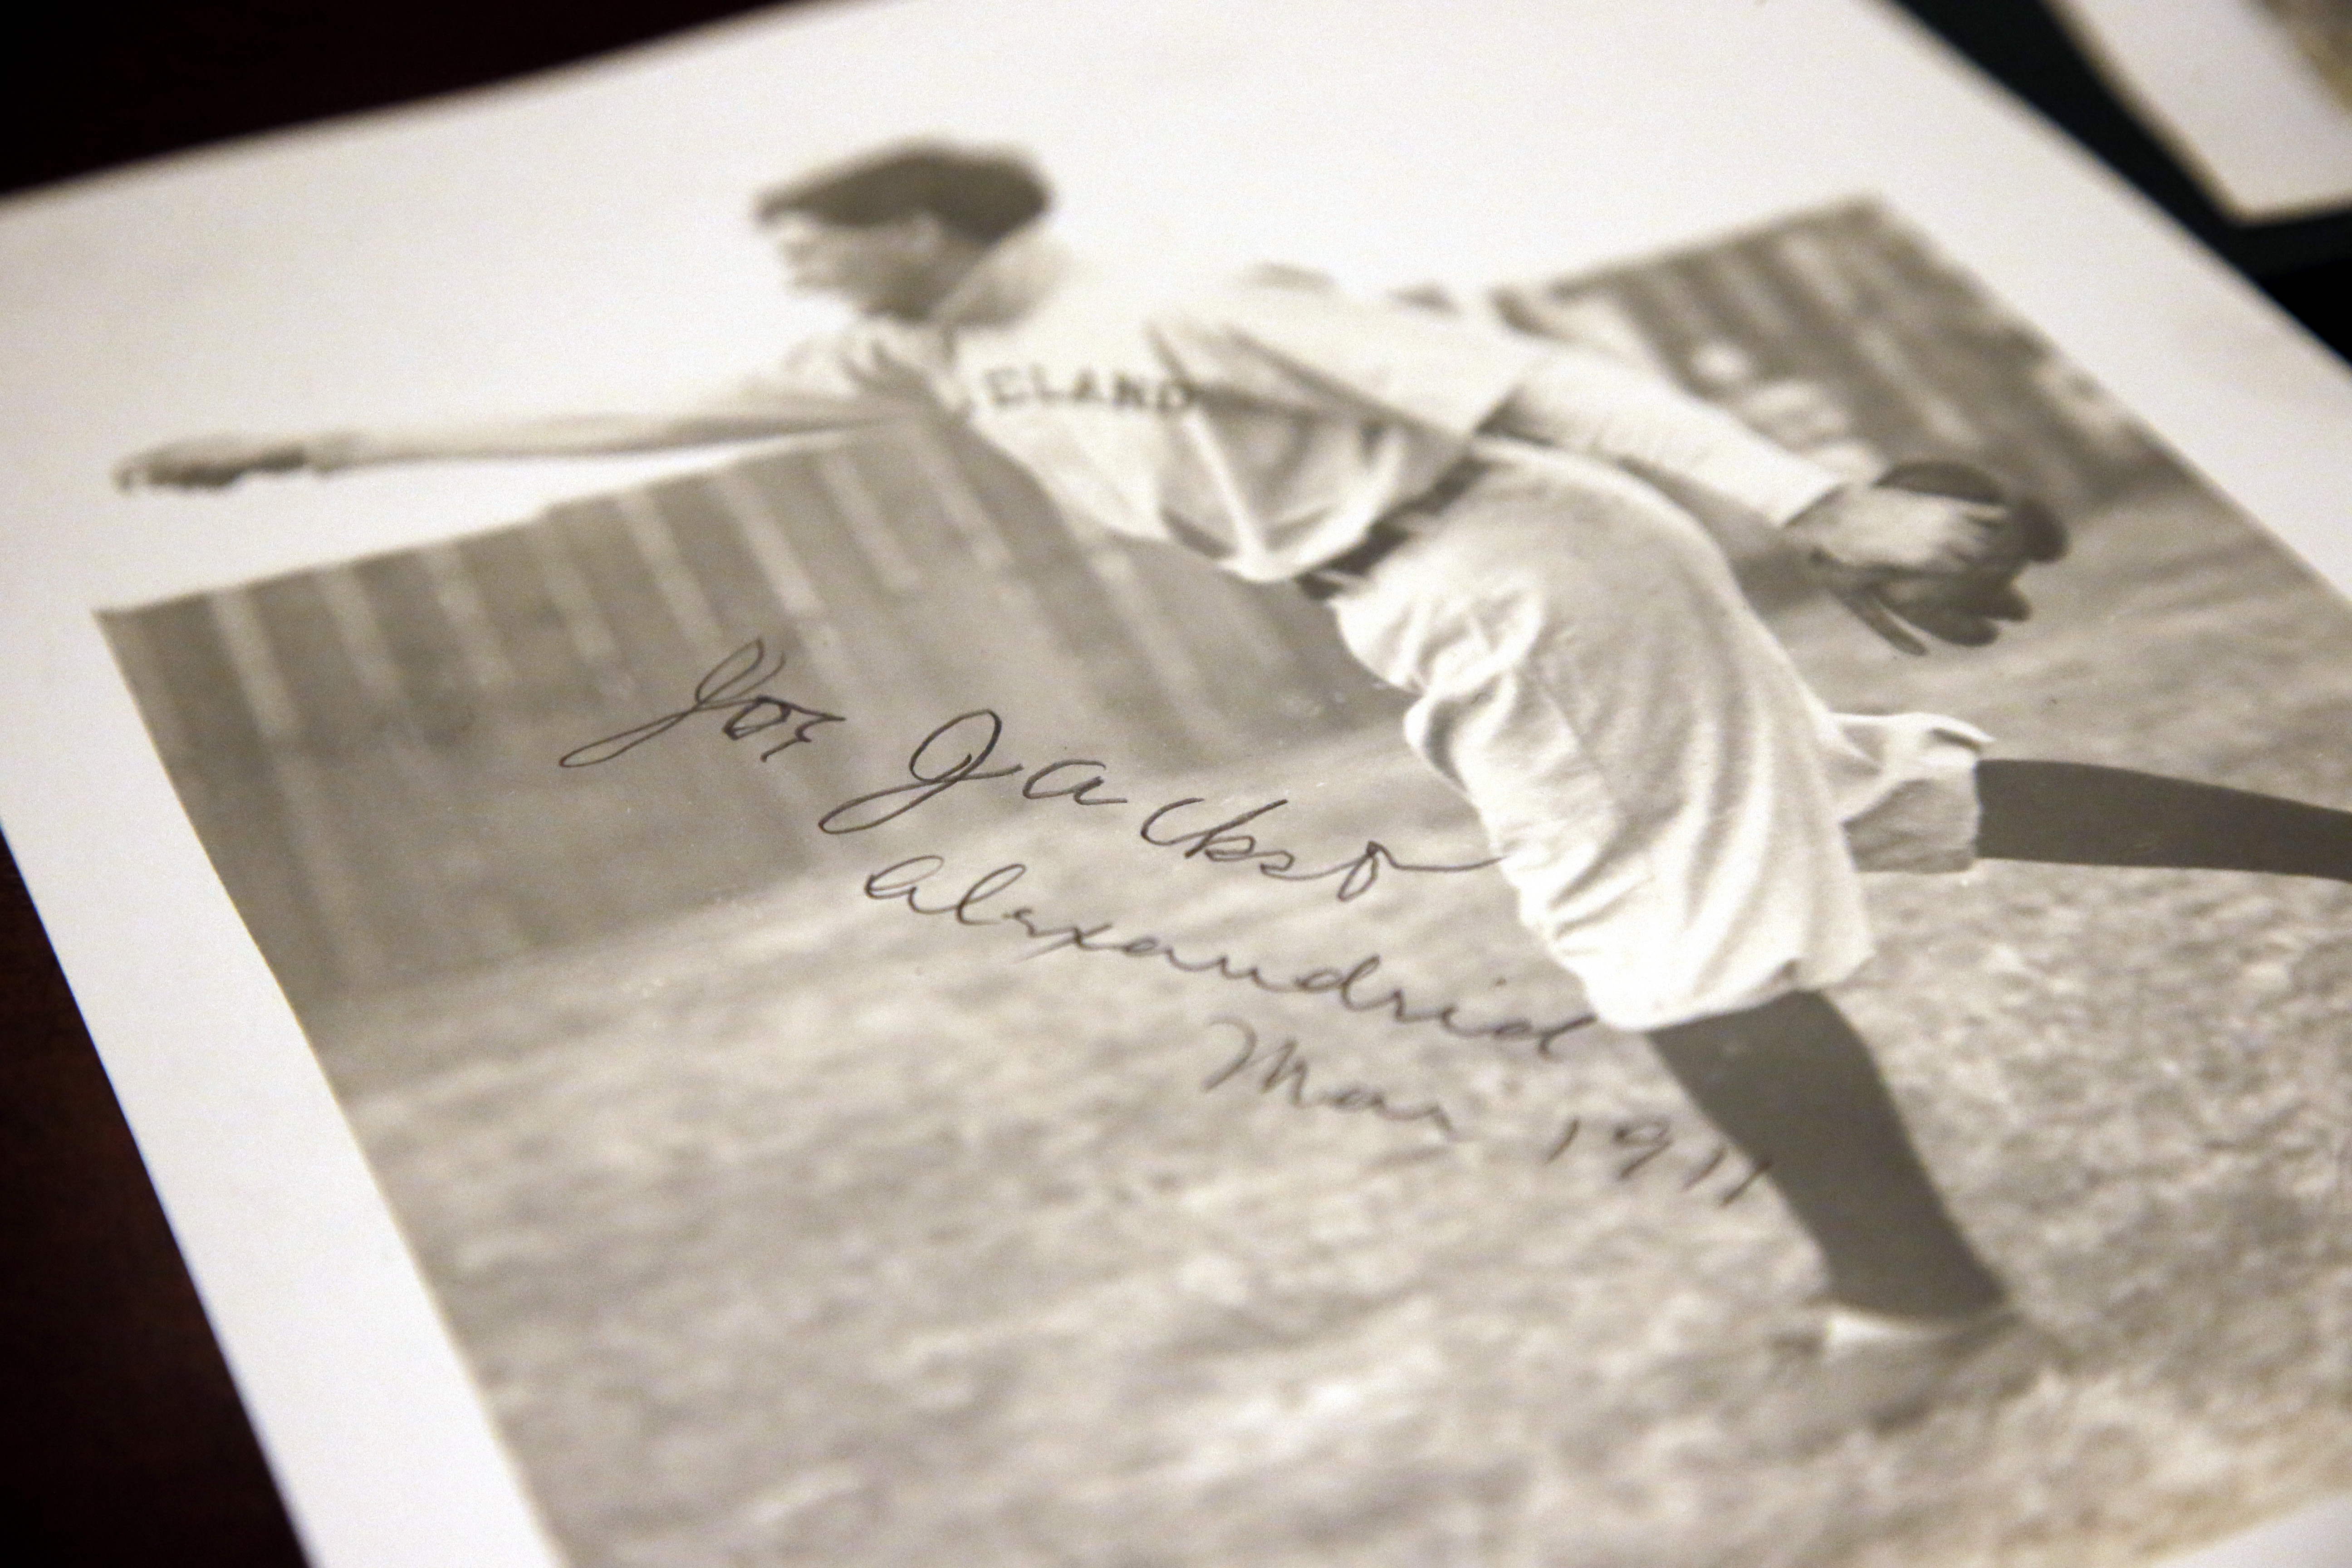 Shoeless Joe Jackson signed photo for sale, could be one-of-a-kind